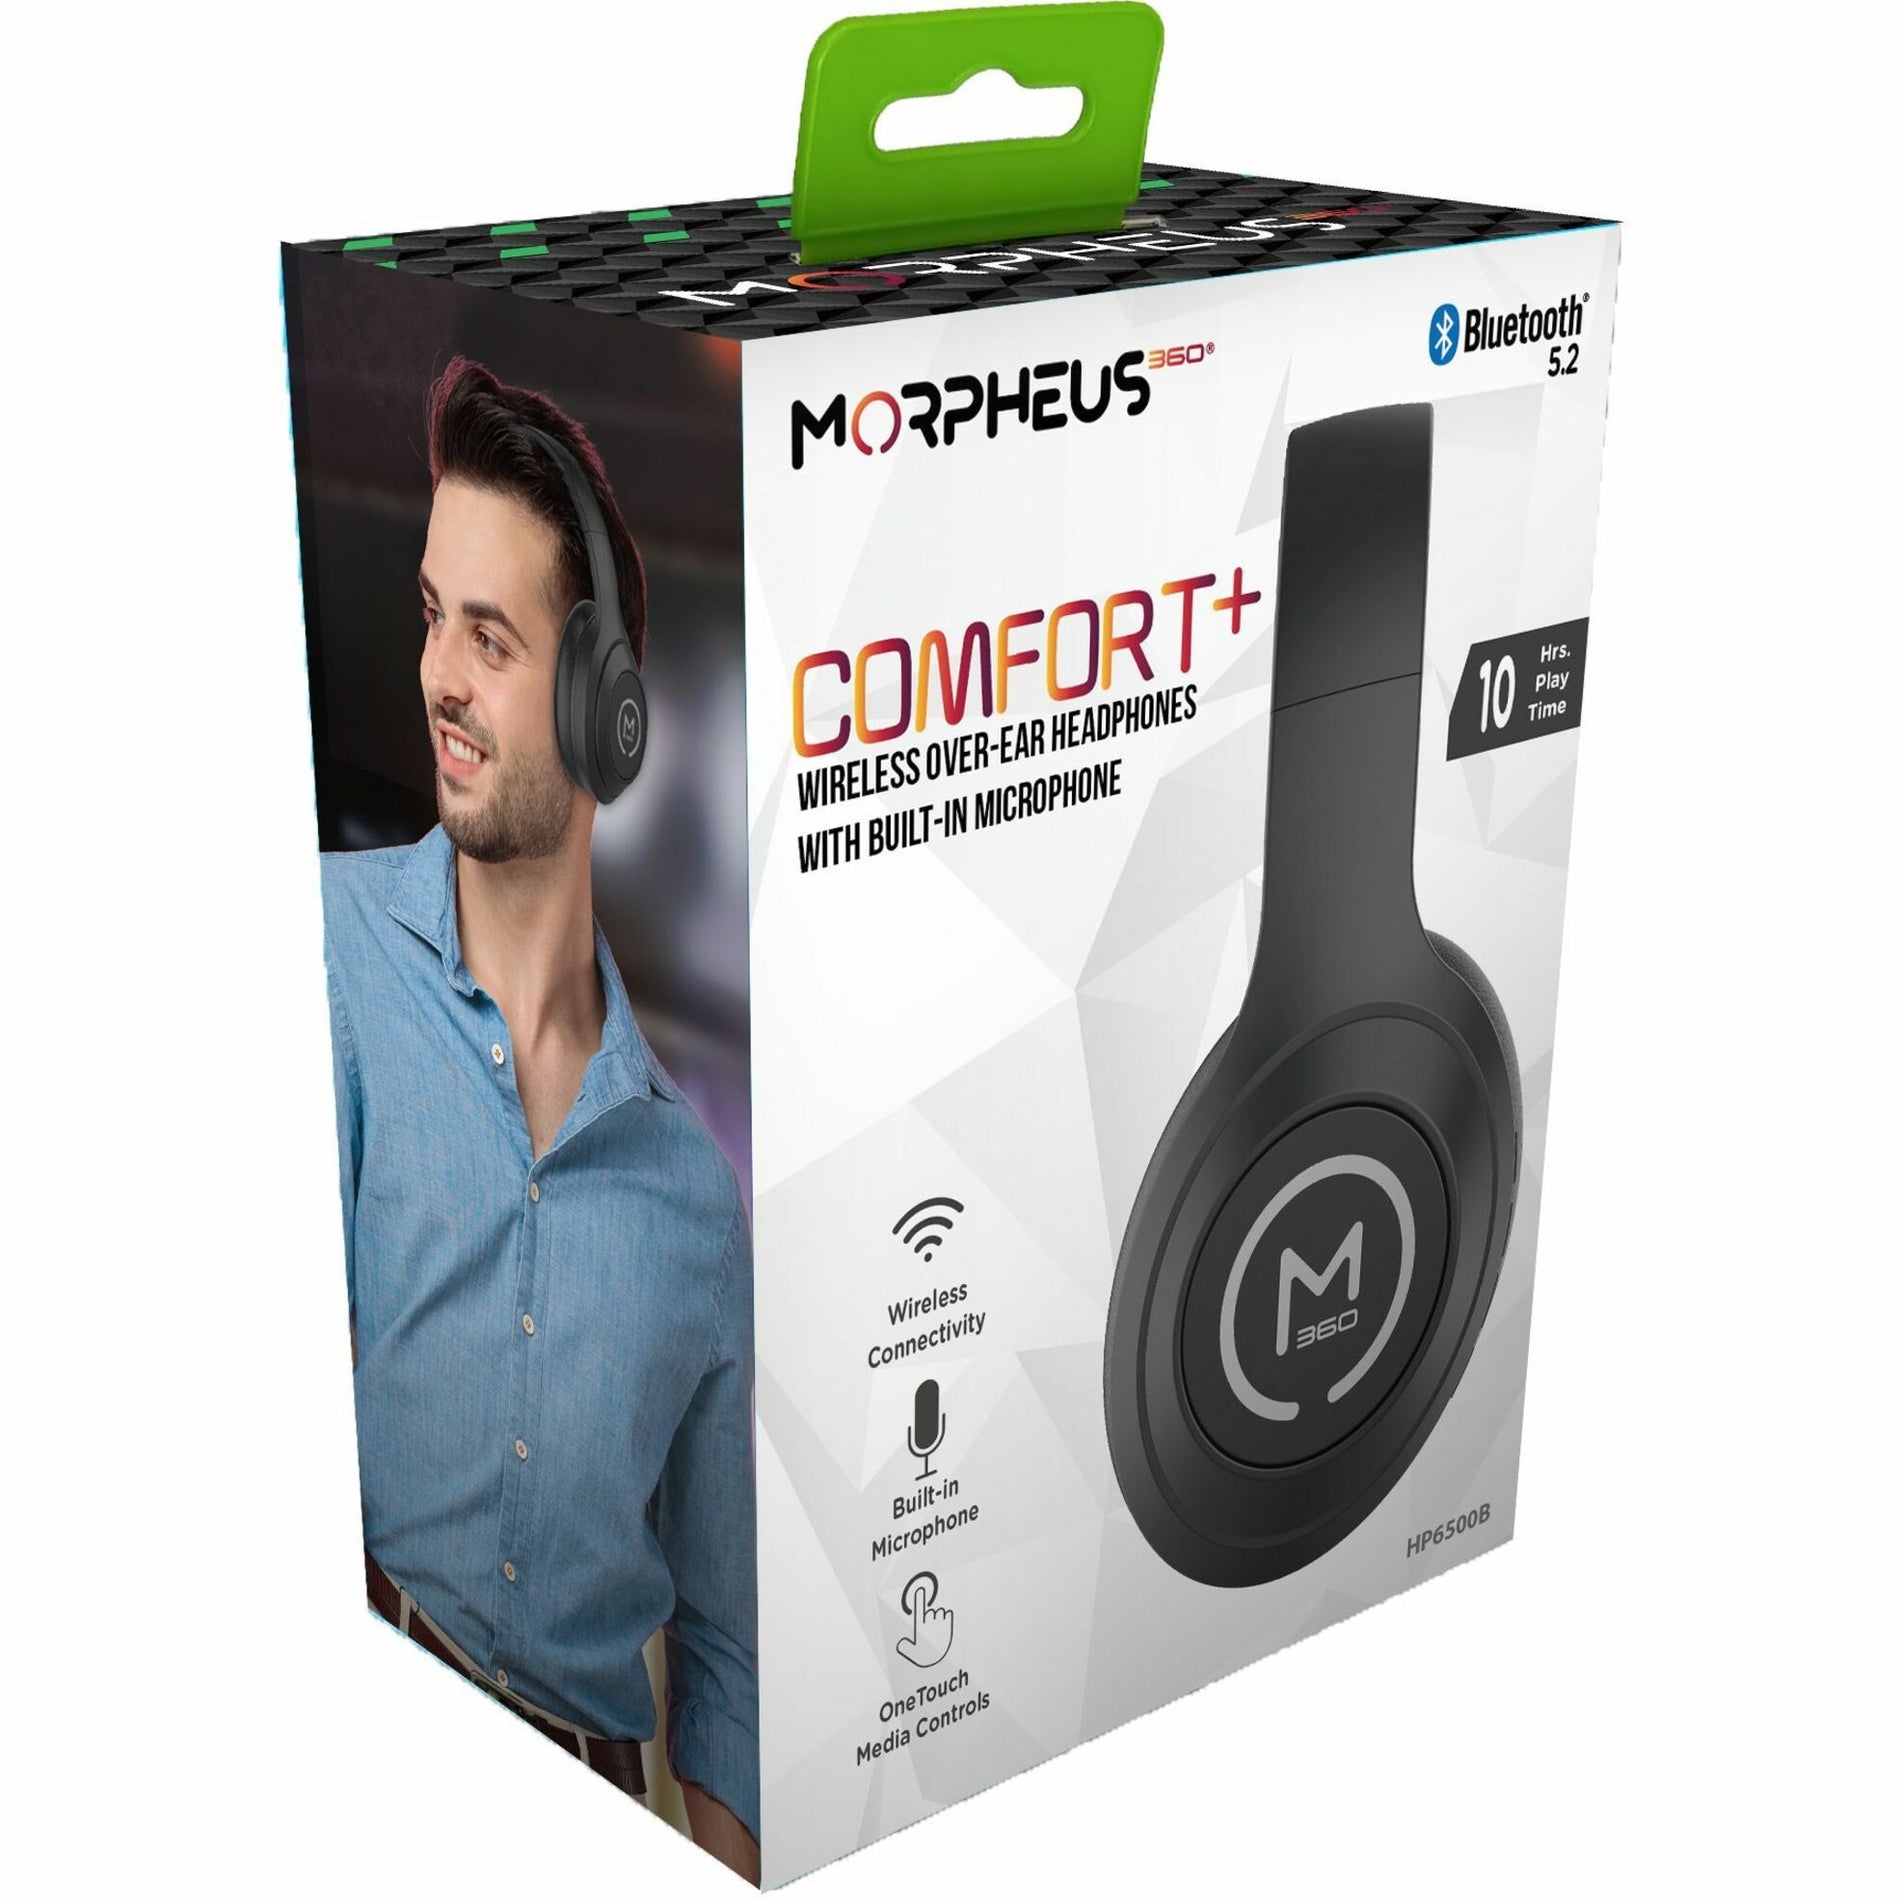 Morpheus 360 HP6500B COMFORT+ Wireless Stereo Headphone, Over-the-head, Over-the-ear, Touch Control, Foldable, Black